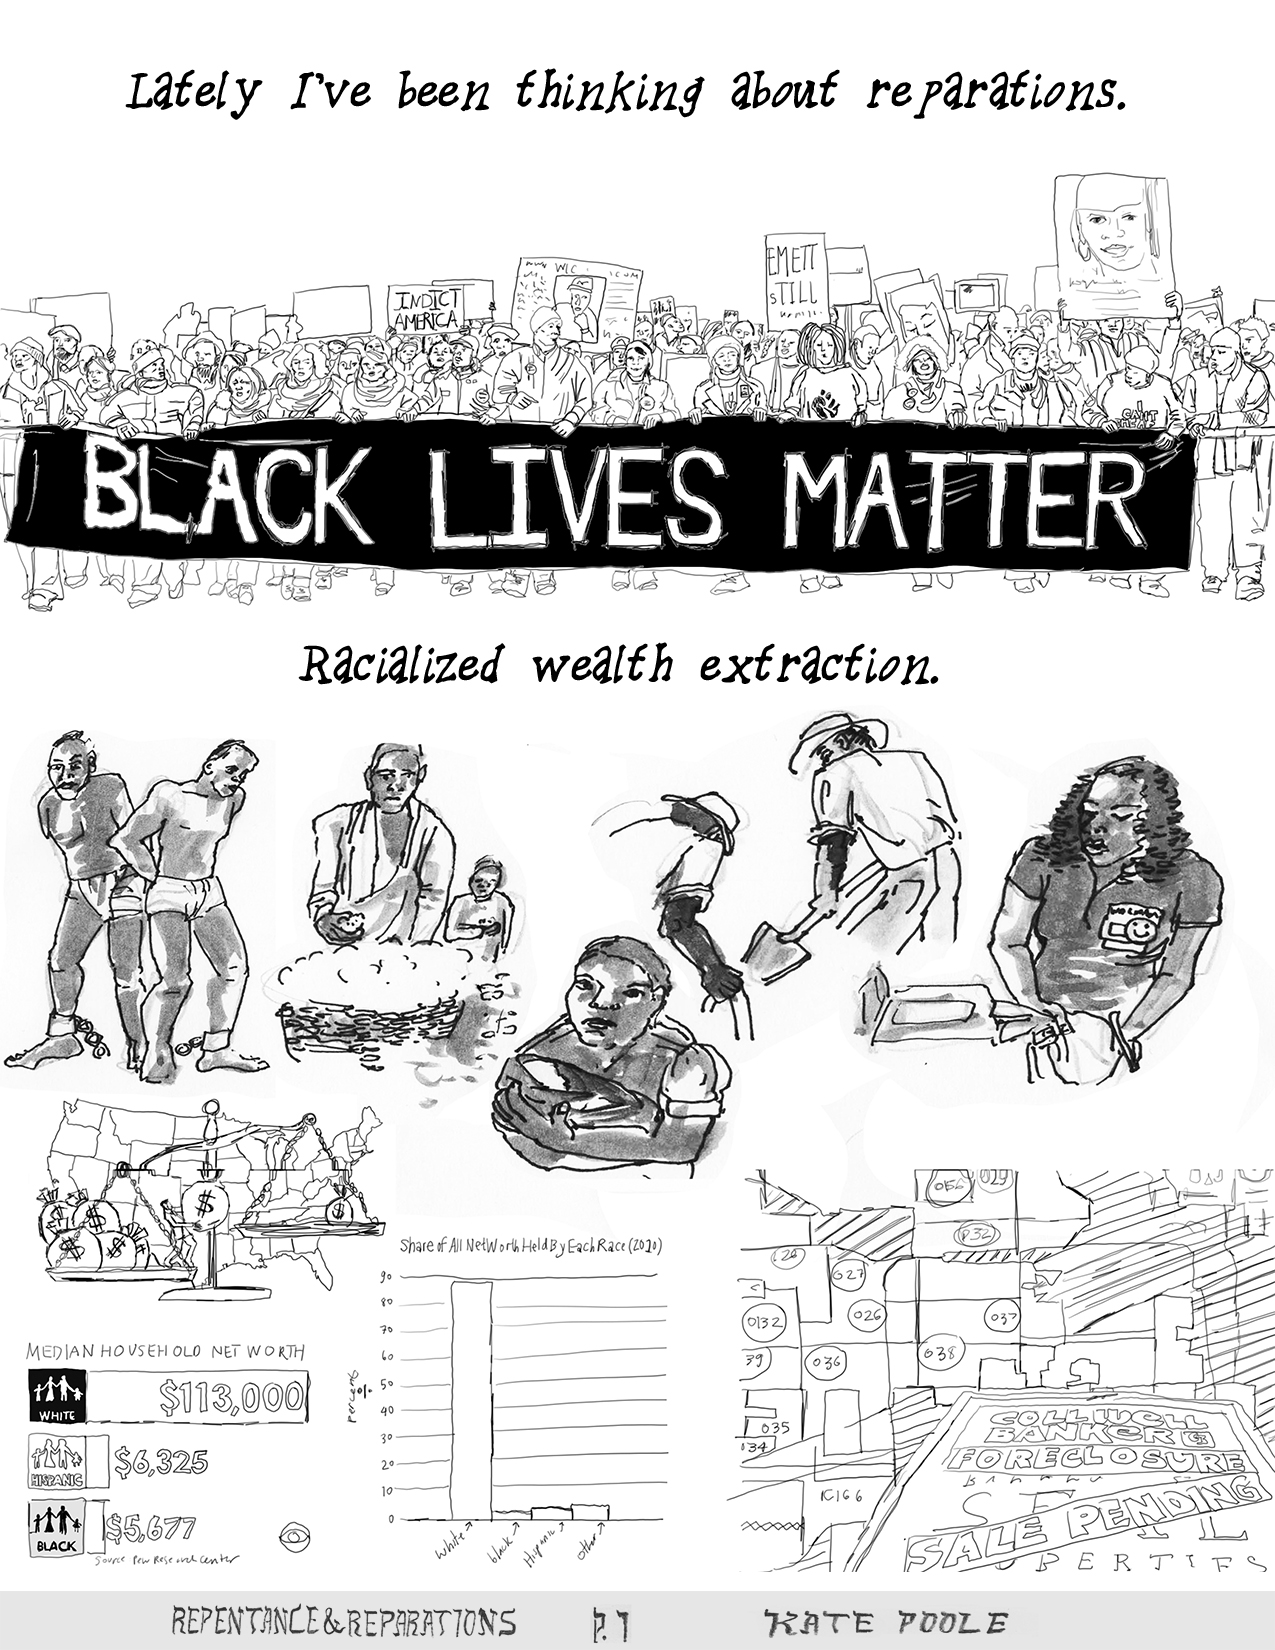 Lately I've been thinking about reparations. Black Lives Matter protest image. Racialized wealth extraction. Images of Black and POC laboring under extractive conditions throughout history. Graphs and charts of historical racialized wealth extraction.